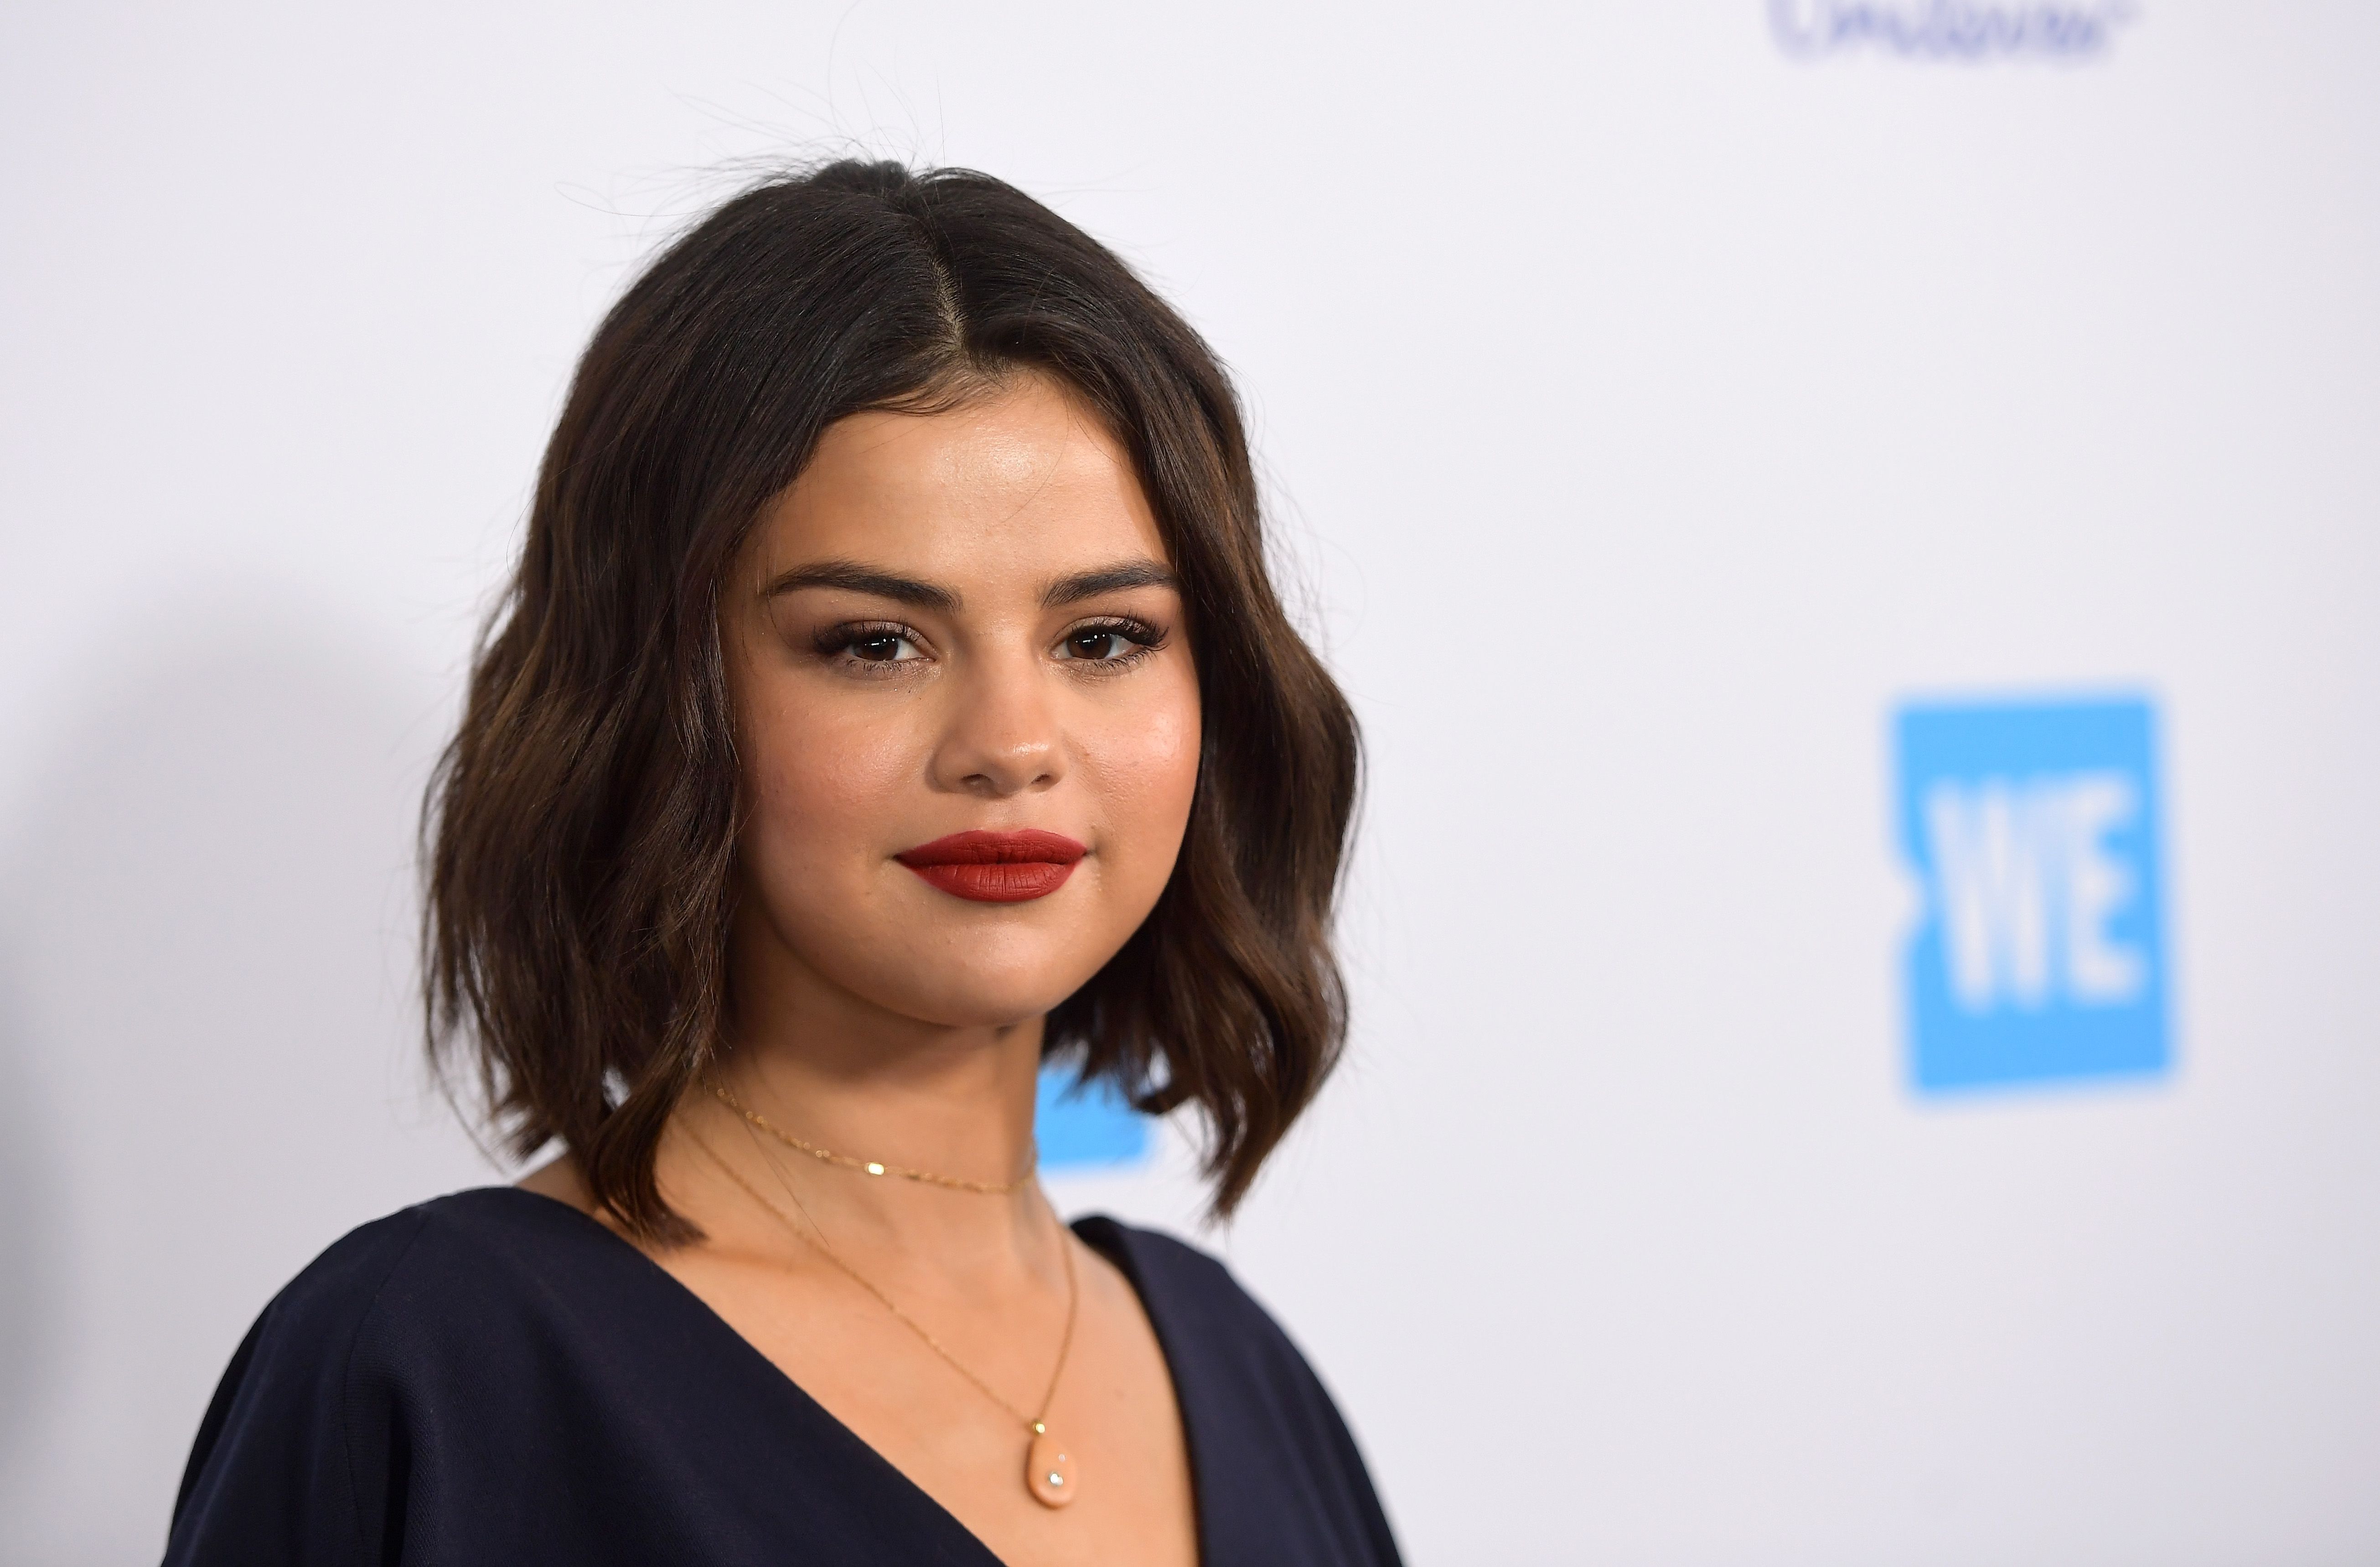 Selena Gomez 43 Best Hairstyles And Haircuts Timeline